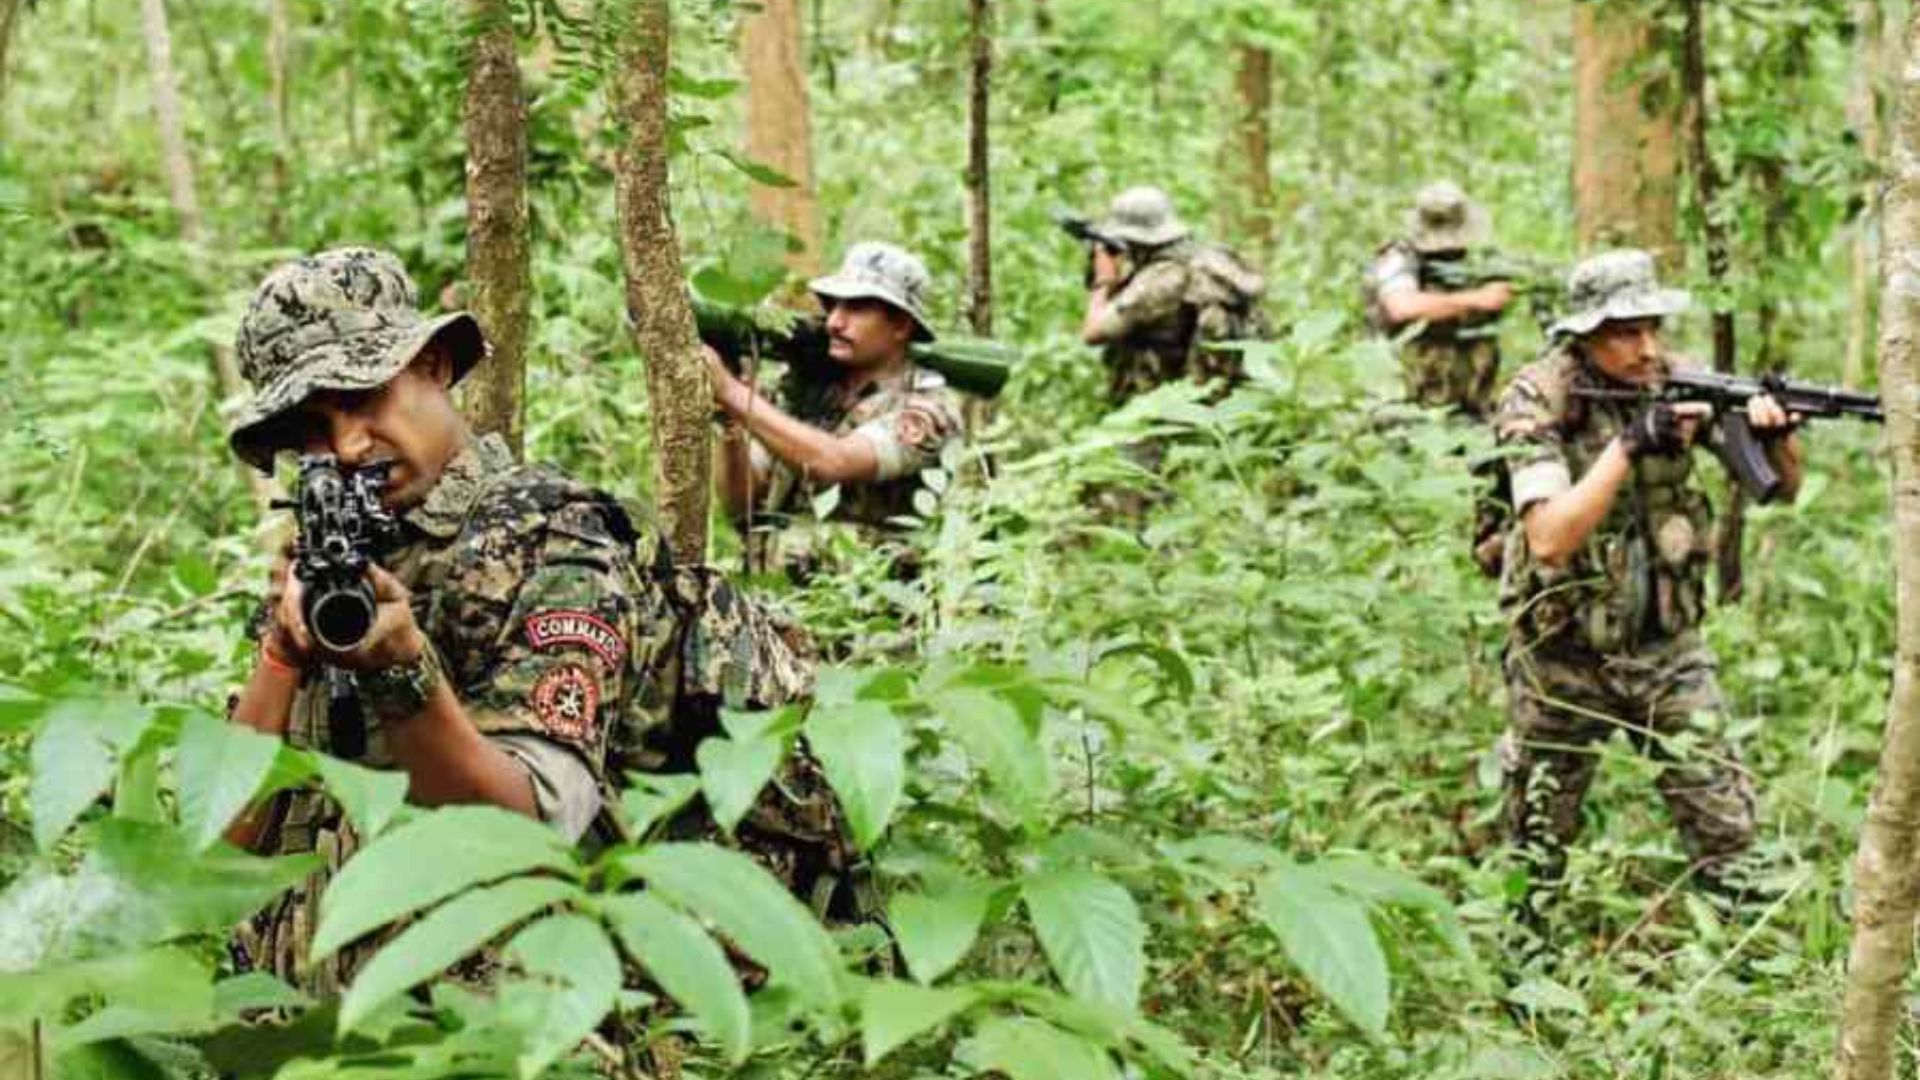 “Security personnel safe; Search operation ongoing,” confirms IG Bastar after 6 naxals killed.